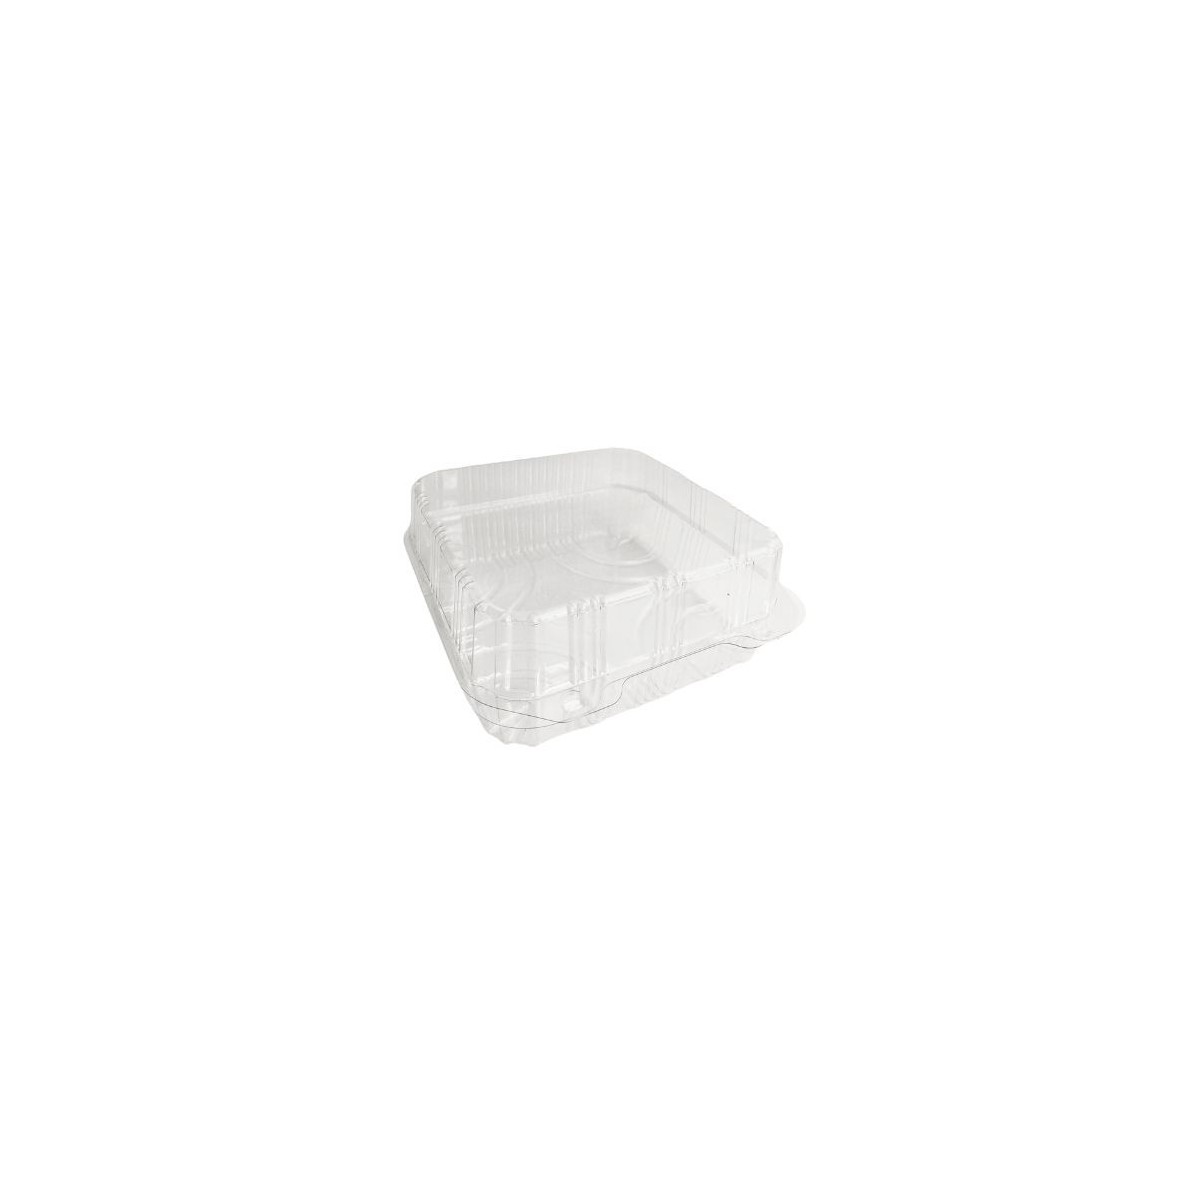 PATIPACK SQUARE PASTRY BOX 16,5X16,5X8CM VENTILATED HINGED LID 320PCS 